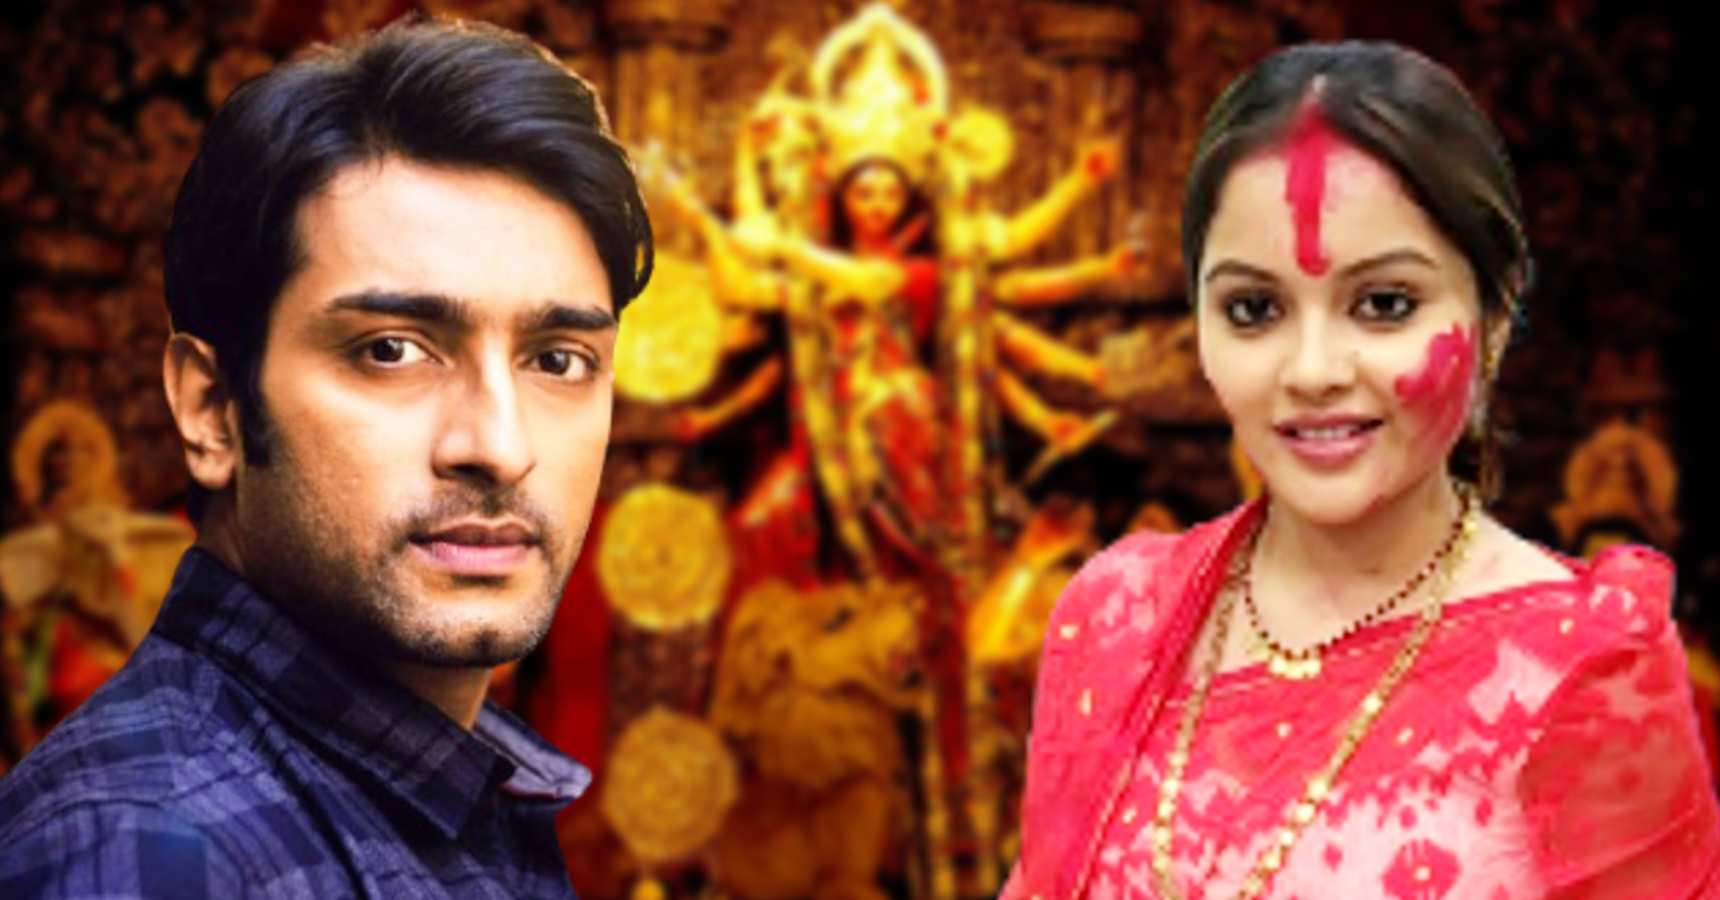 Nabanita Das will celebrate her Durga Puja without Jeetu Kamal for the first time